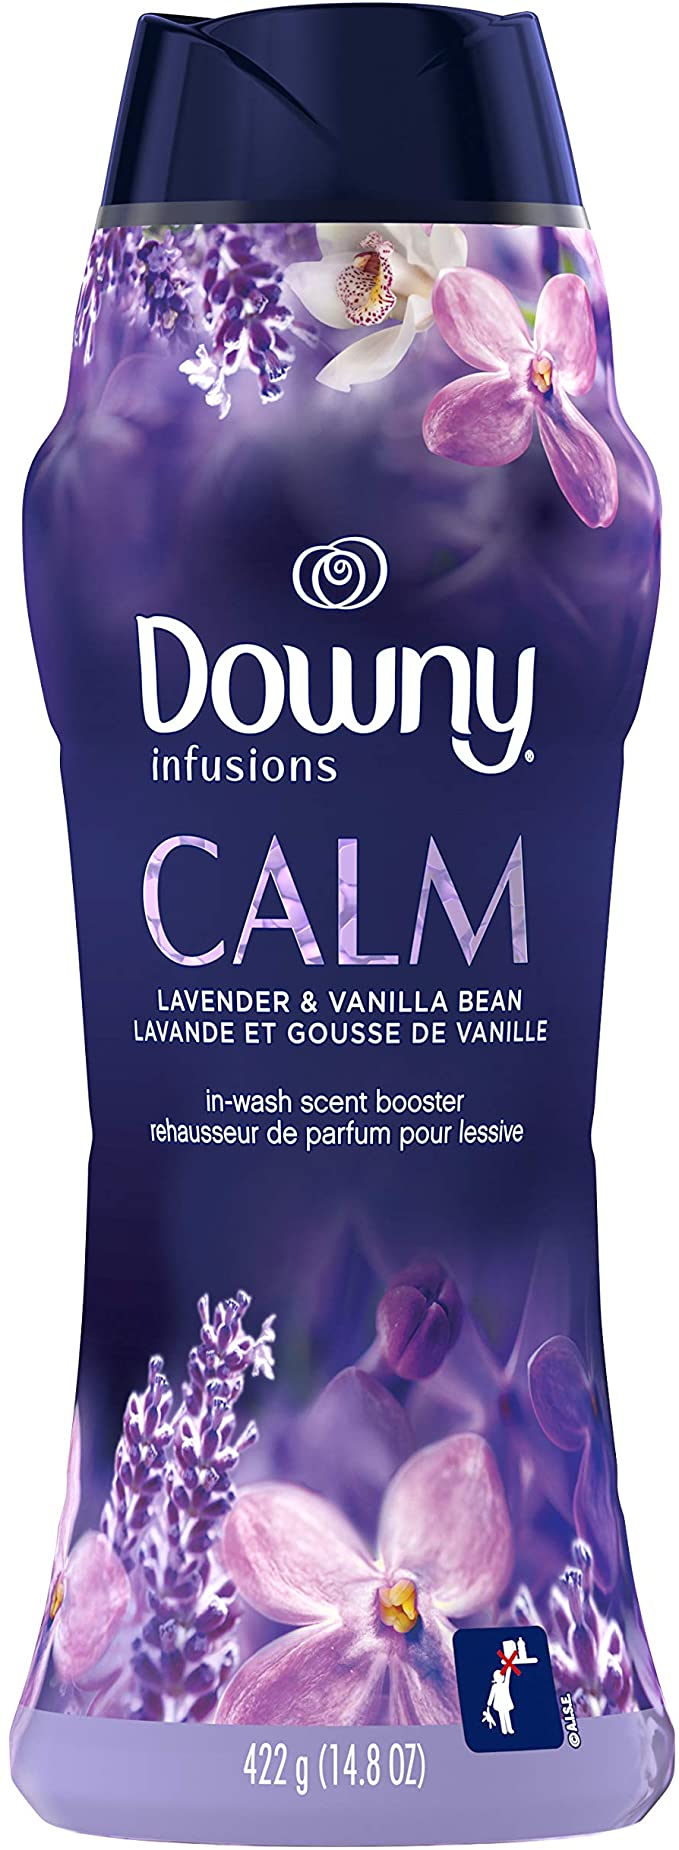 Downy Infusions In-Wash Laundry Scent Booster Beads, Calm, Lavender & Vanilla Bean, 422 g - Packaging May Vary